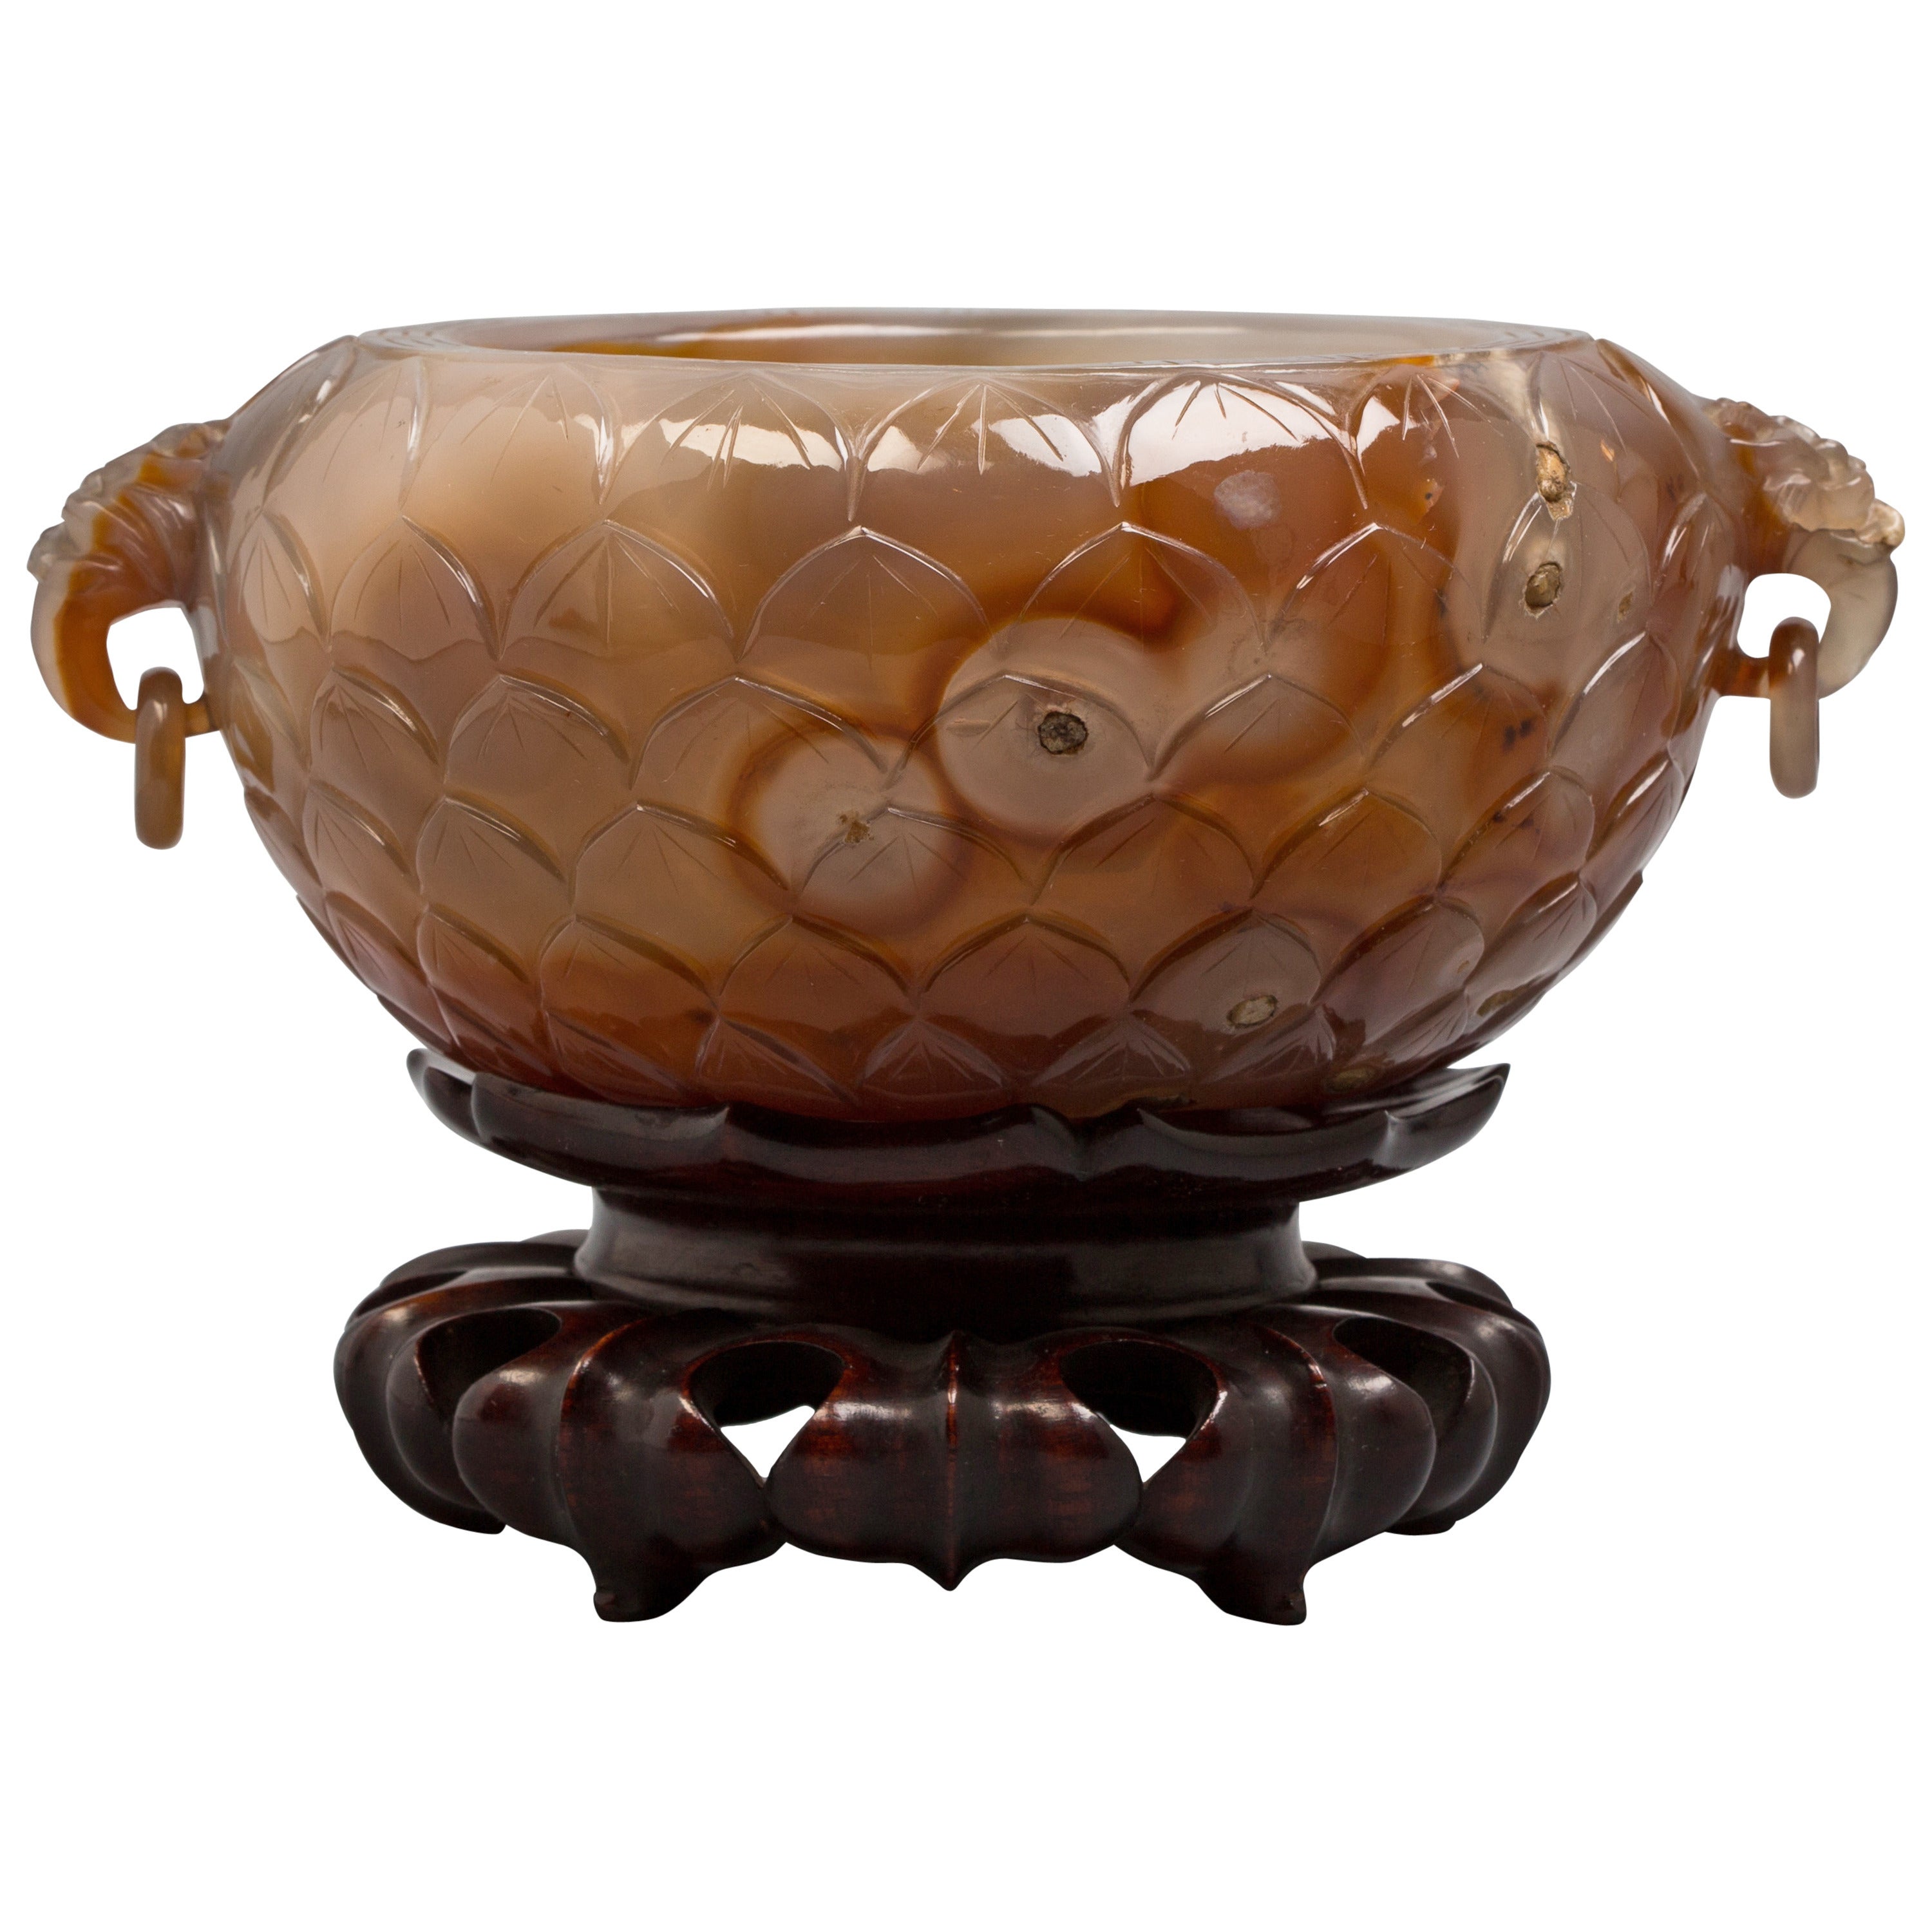 Chinese Carved Agate Bowl on Stand, 18th Century